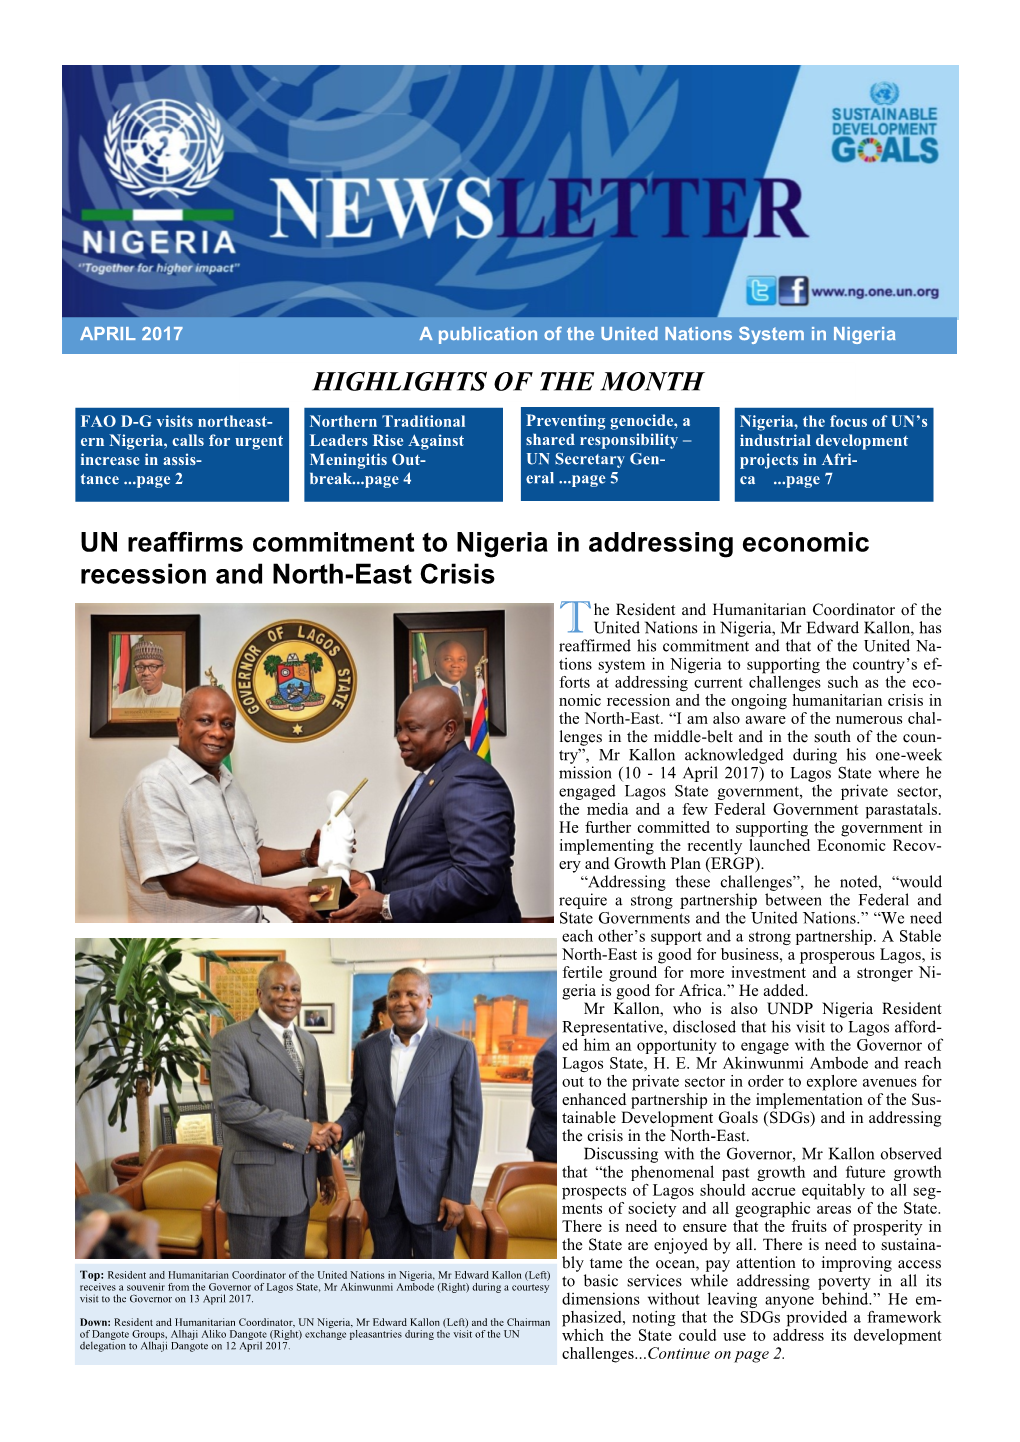 HIGHLIGHTS of the MONTH UN Reaffirms Commitment to Nigeria In